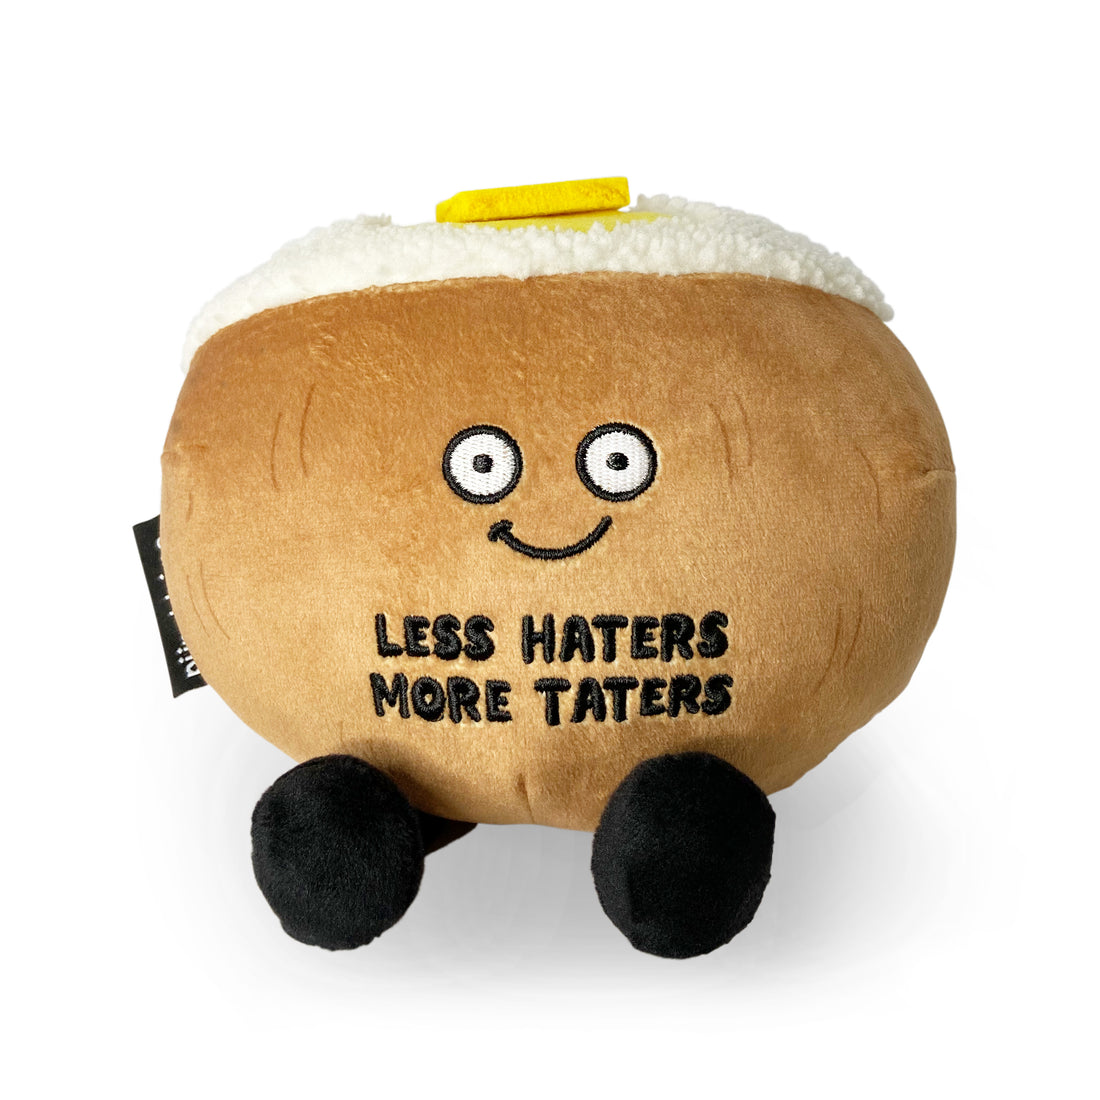 &quot;Less Haters,More Taters&quot; Plush Baked Potato